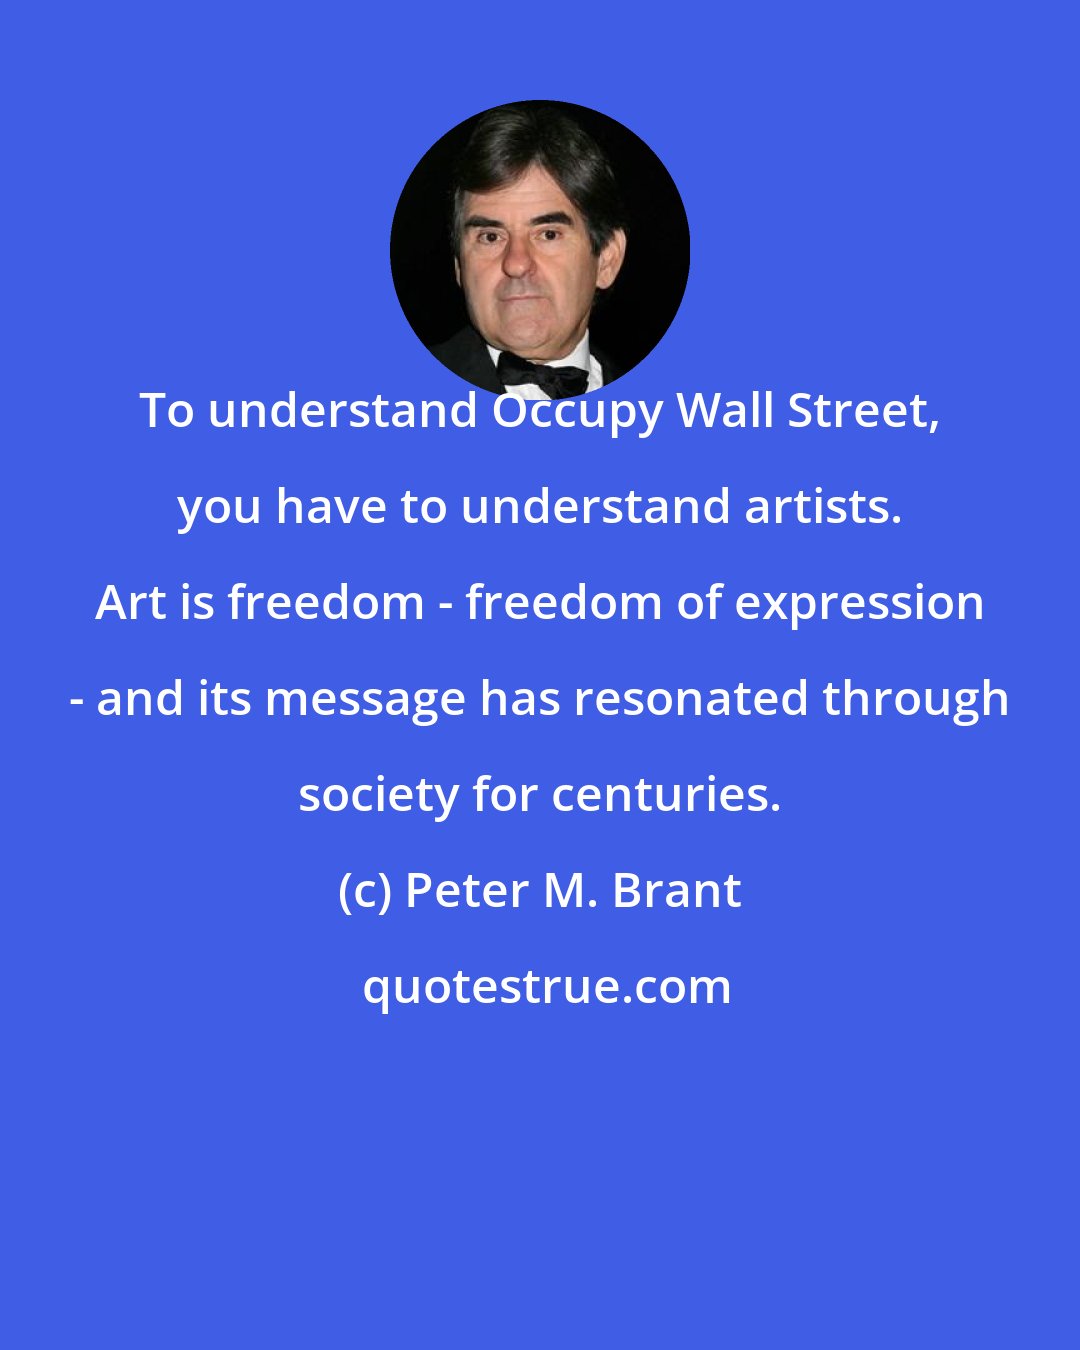 Peter M. Brant: To understand Occupy Wall Street, you have to understand artists. Art is freedom - freedom of expression - and its message has resonated through society for centuries.